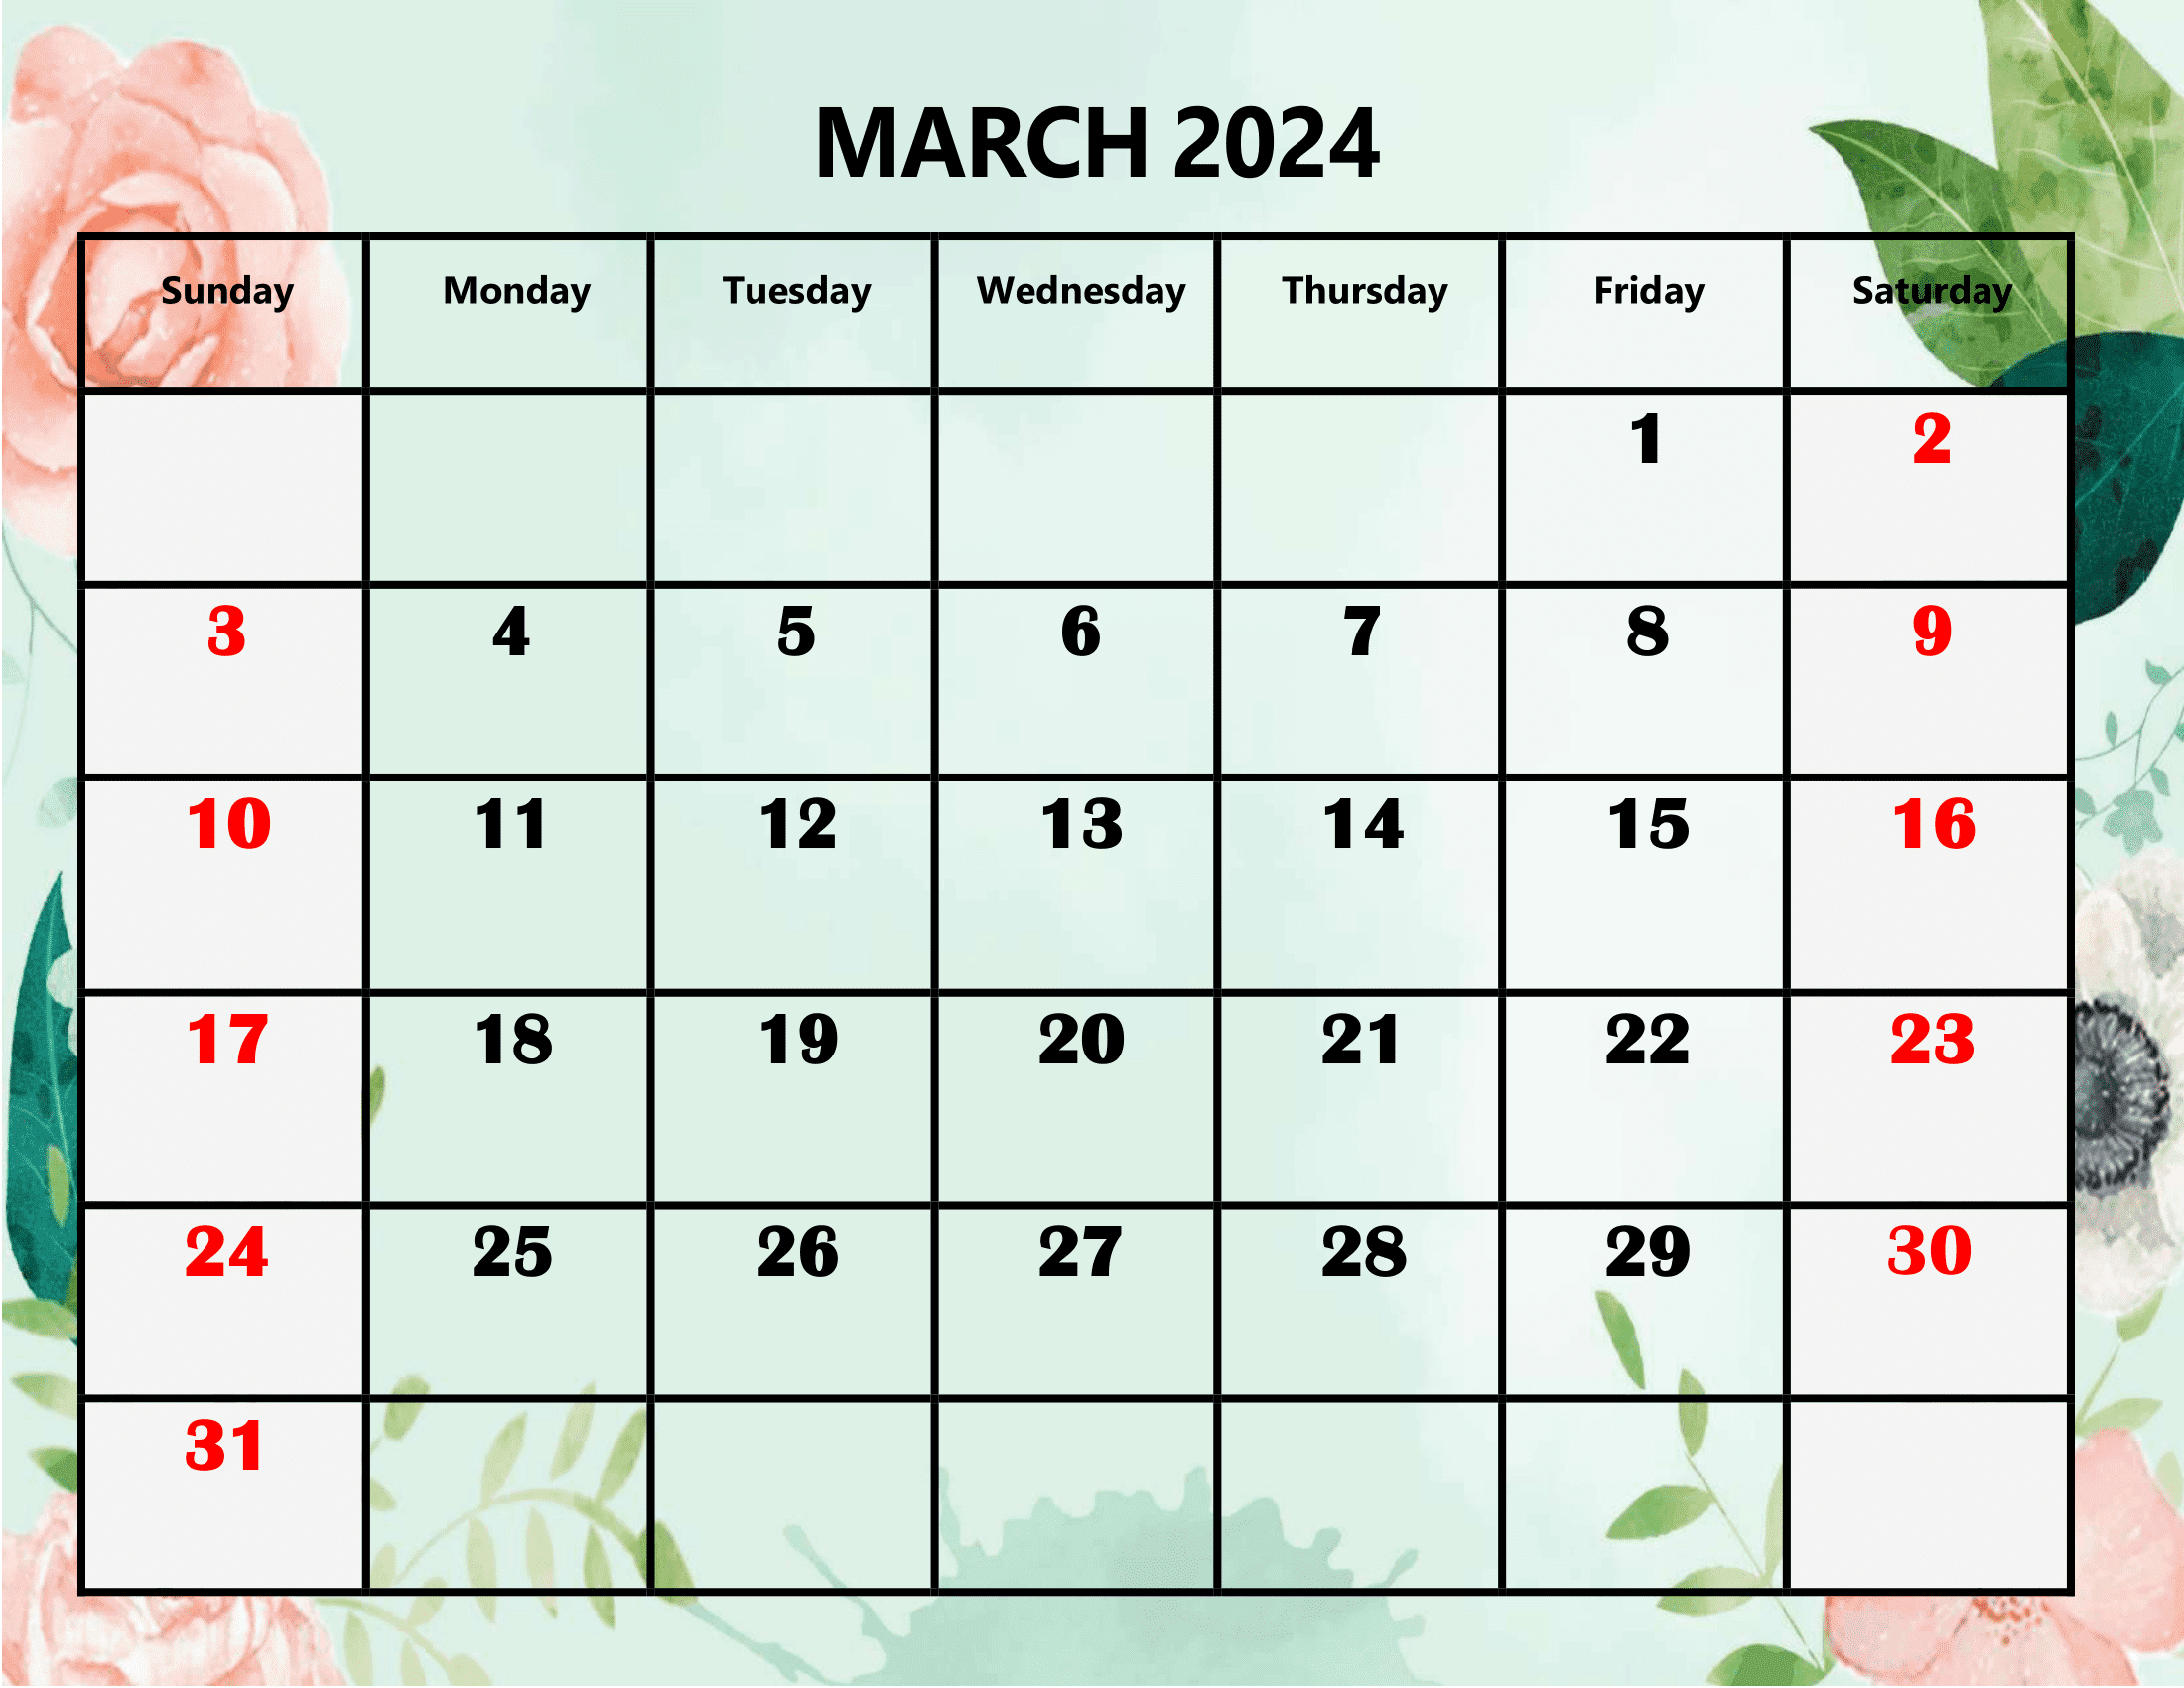 March 2024 Calendar Printable Pdf With Holidays Template Free | Printable Calendar 2024 March